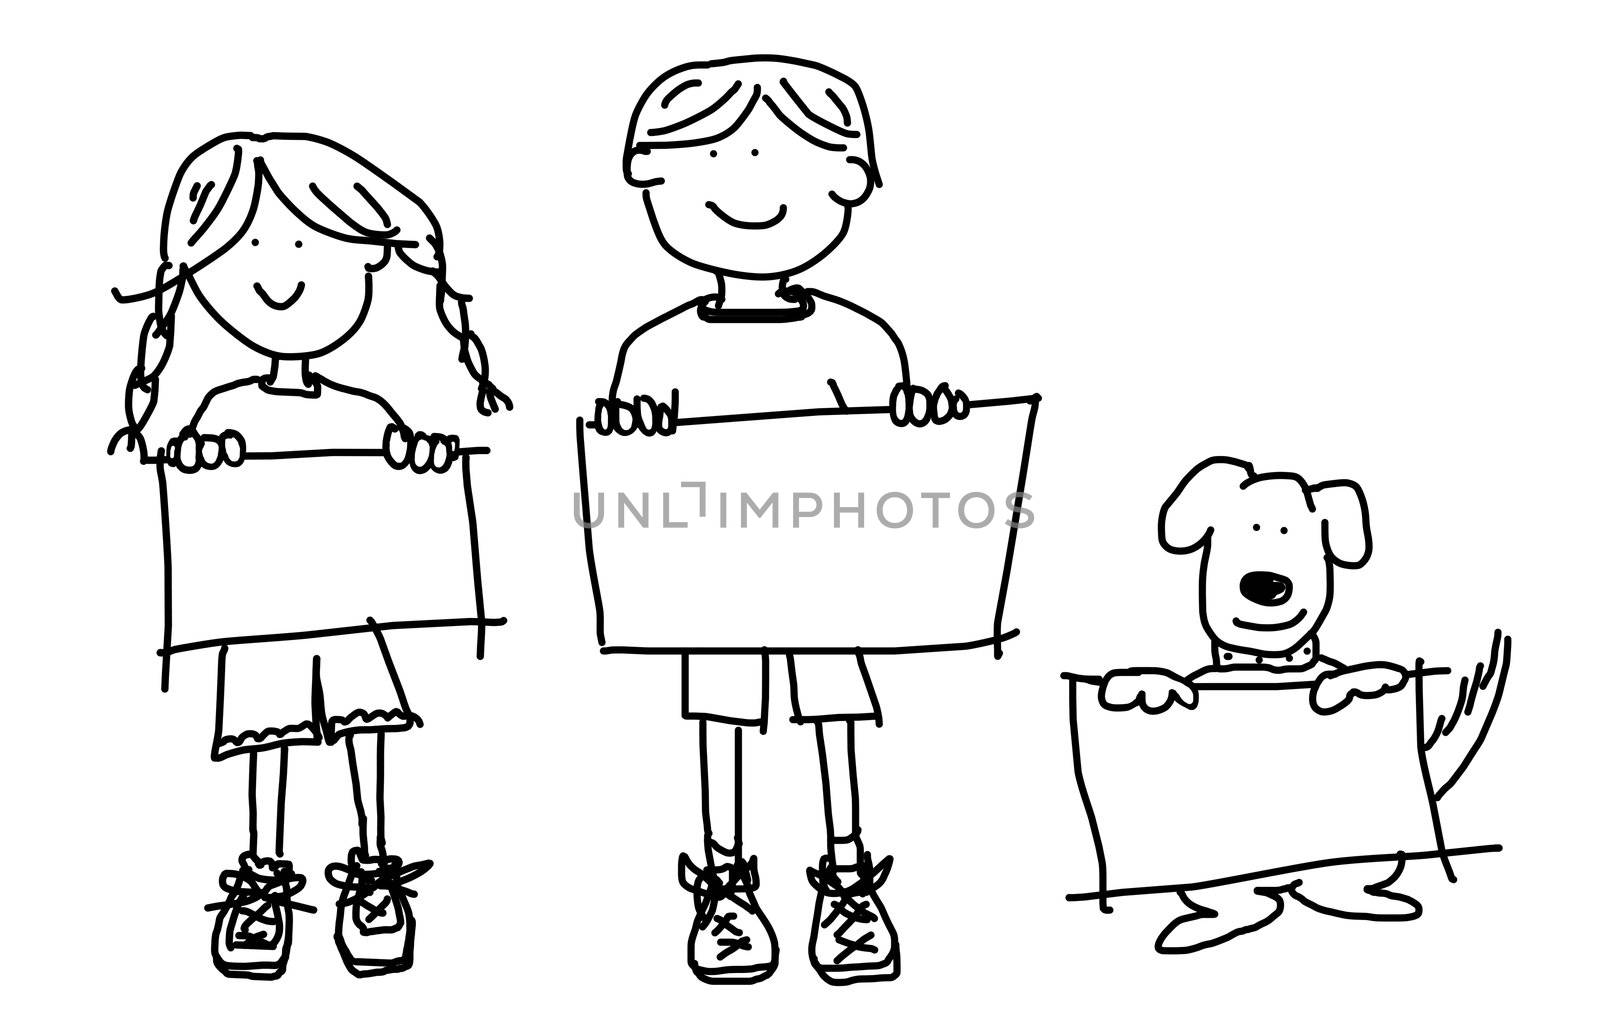 Kids and dog holding empty signs illustration by Mirage3